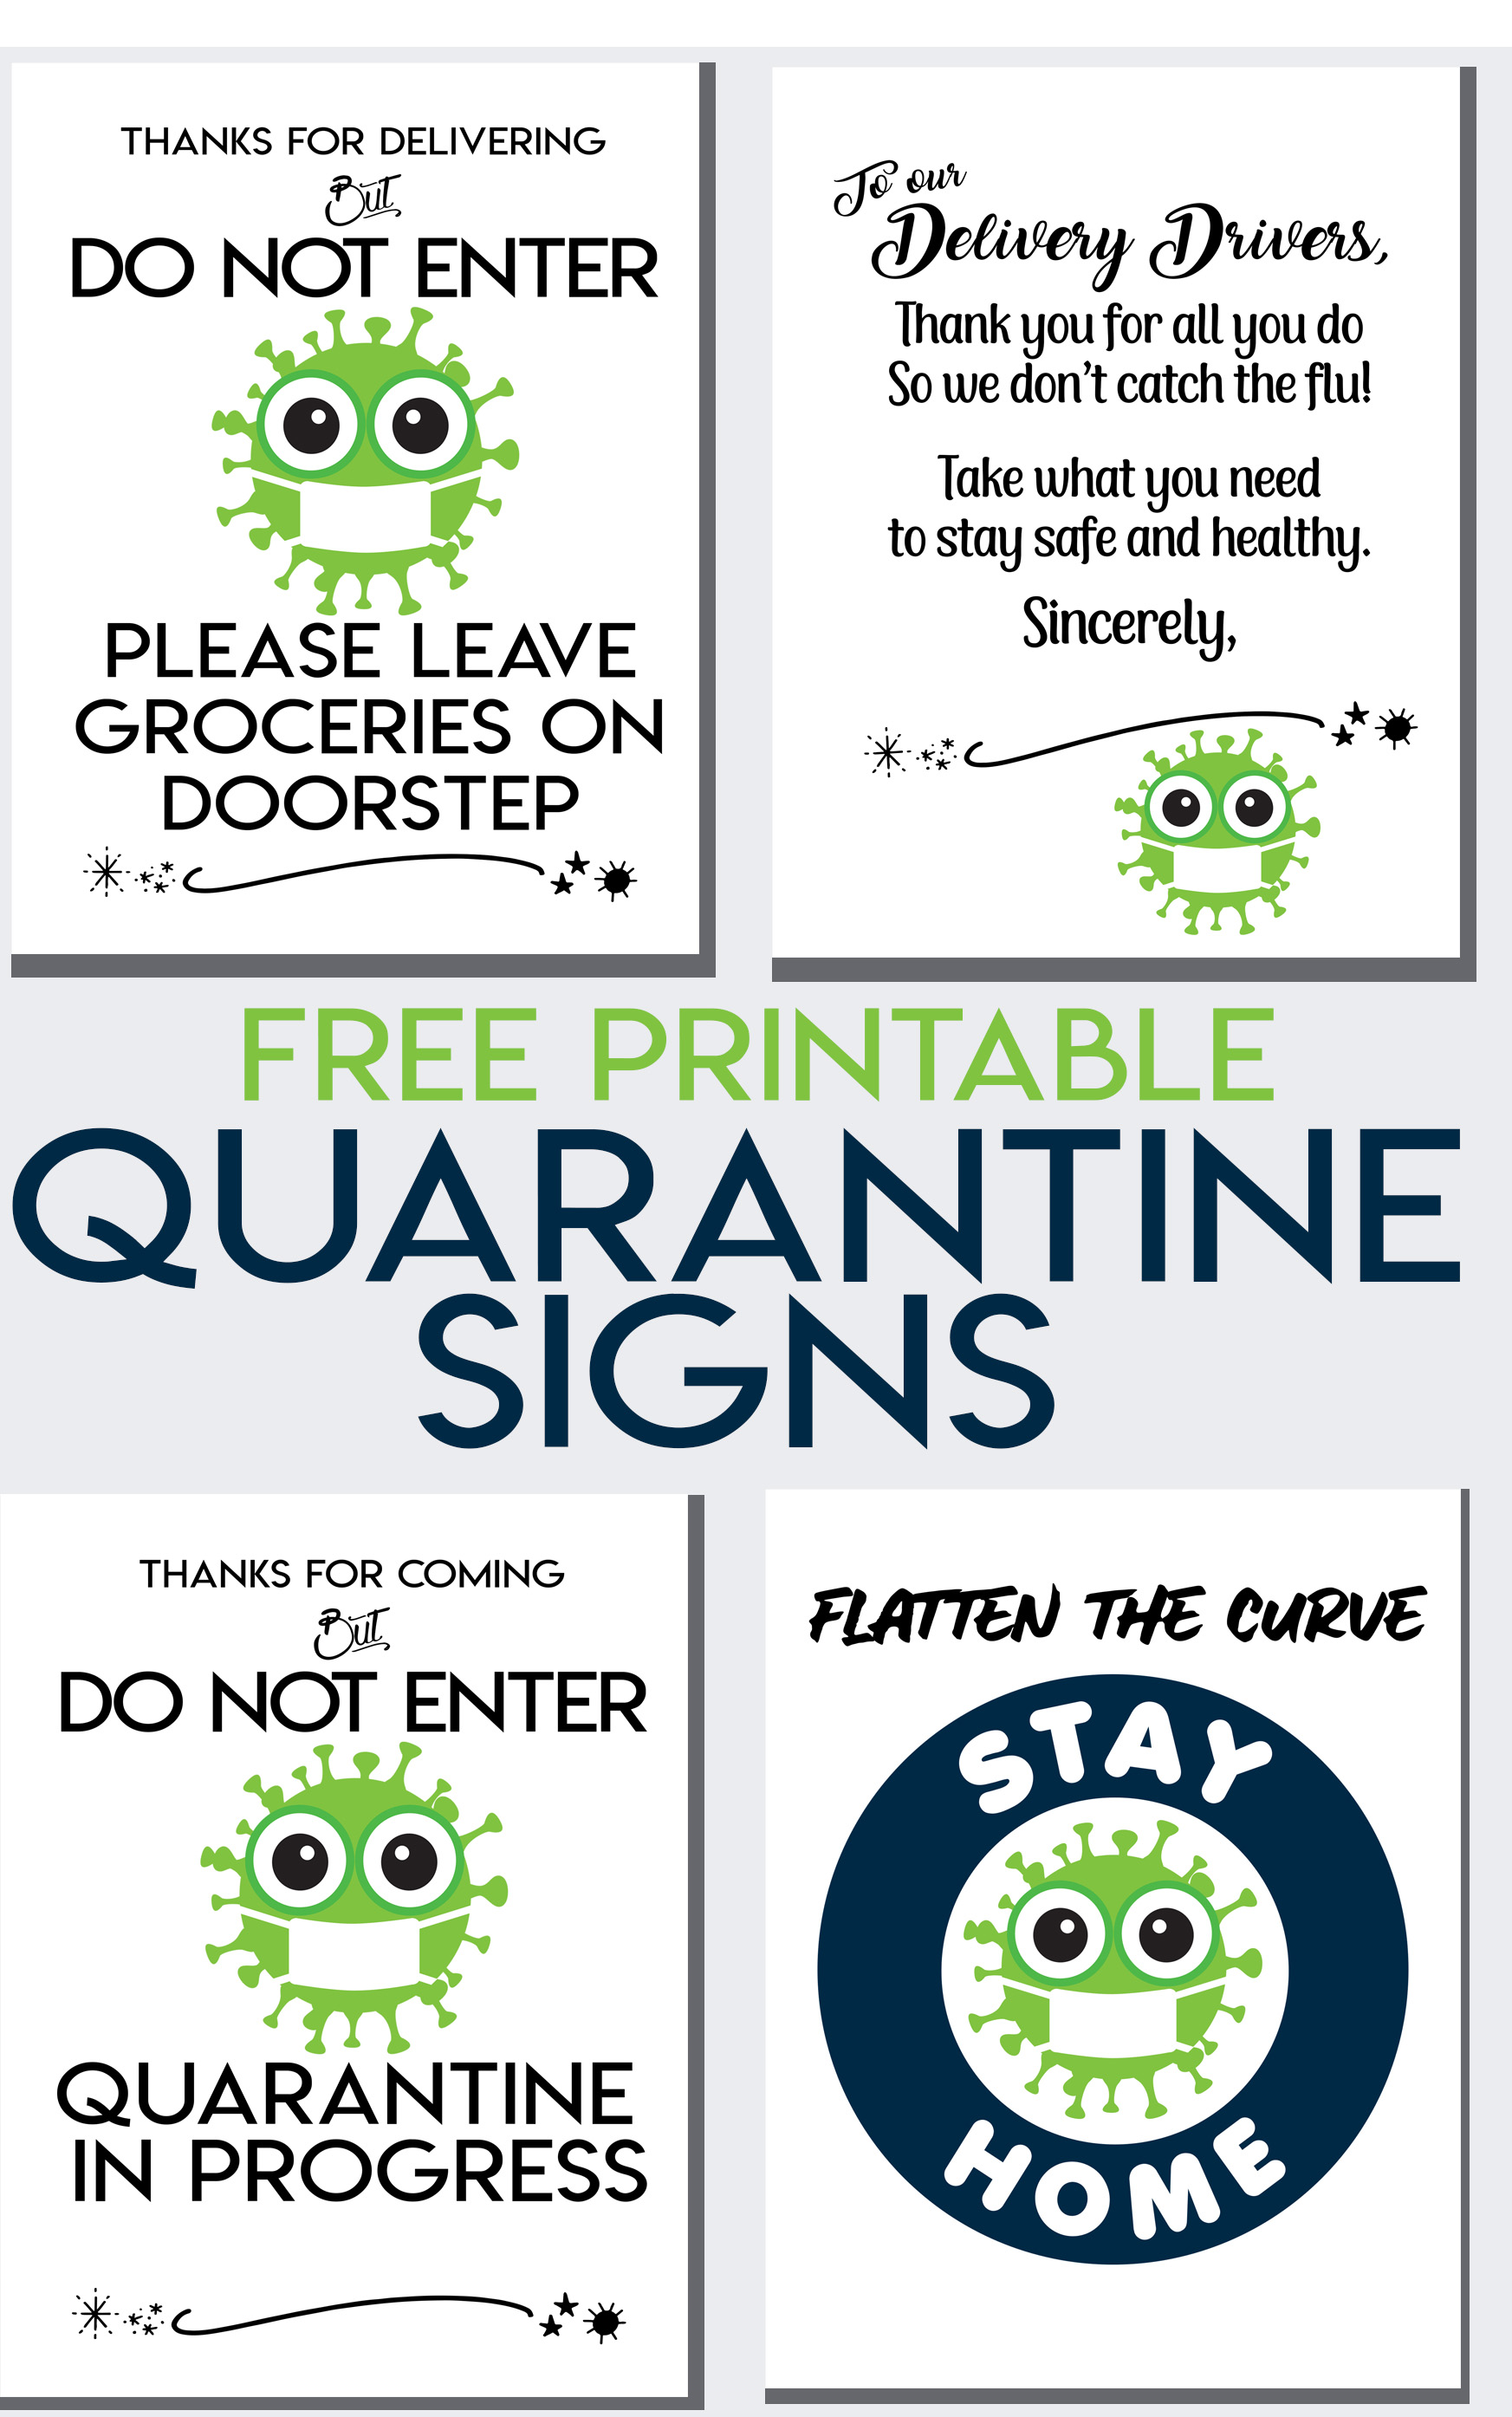 thank-your-delivery-drivers-free-printable-quarantine-signs-beth-bryan